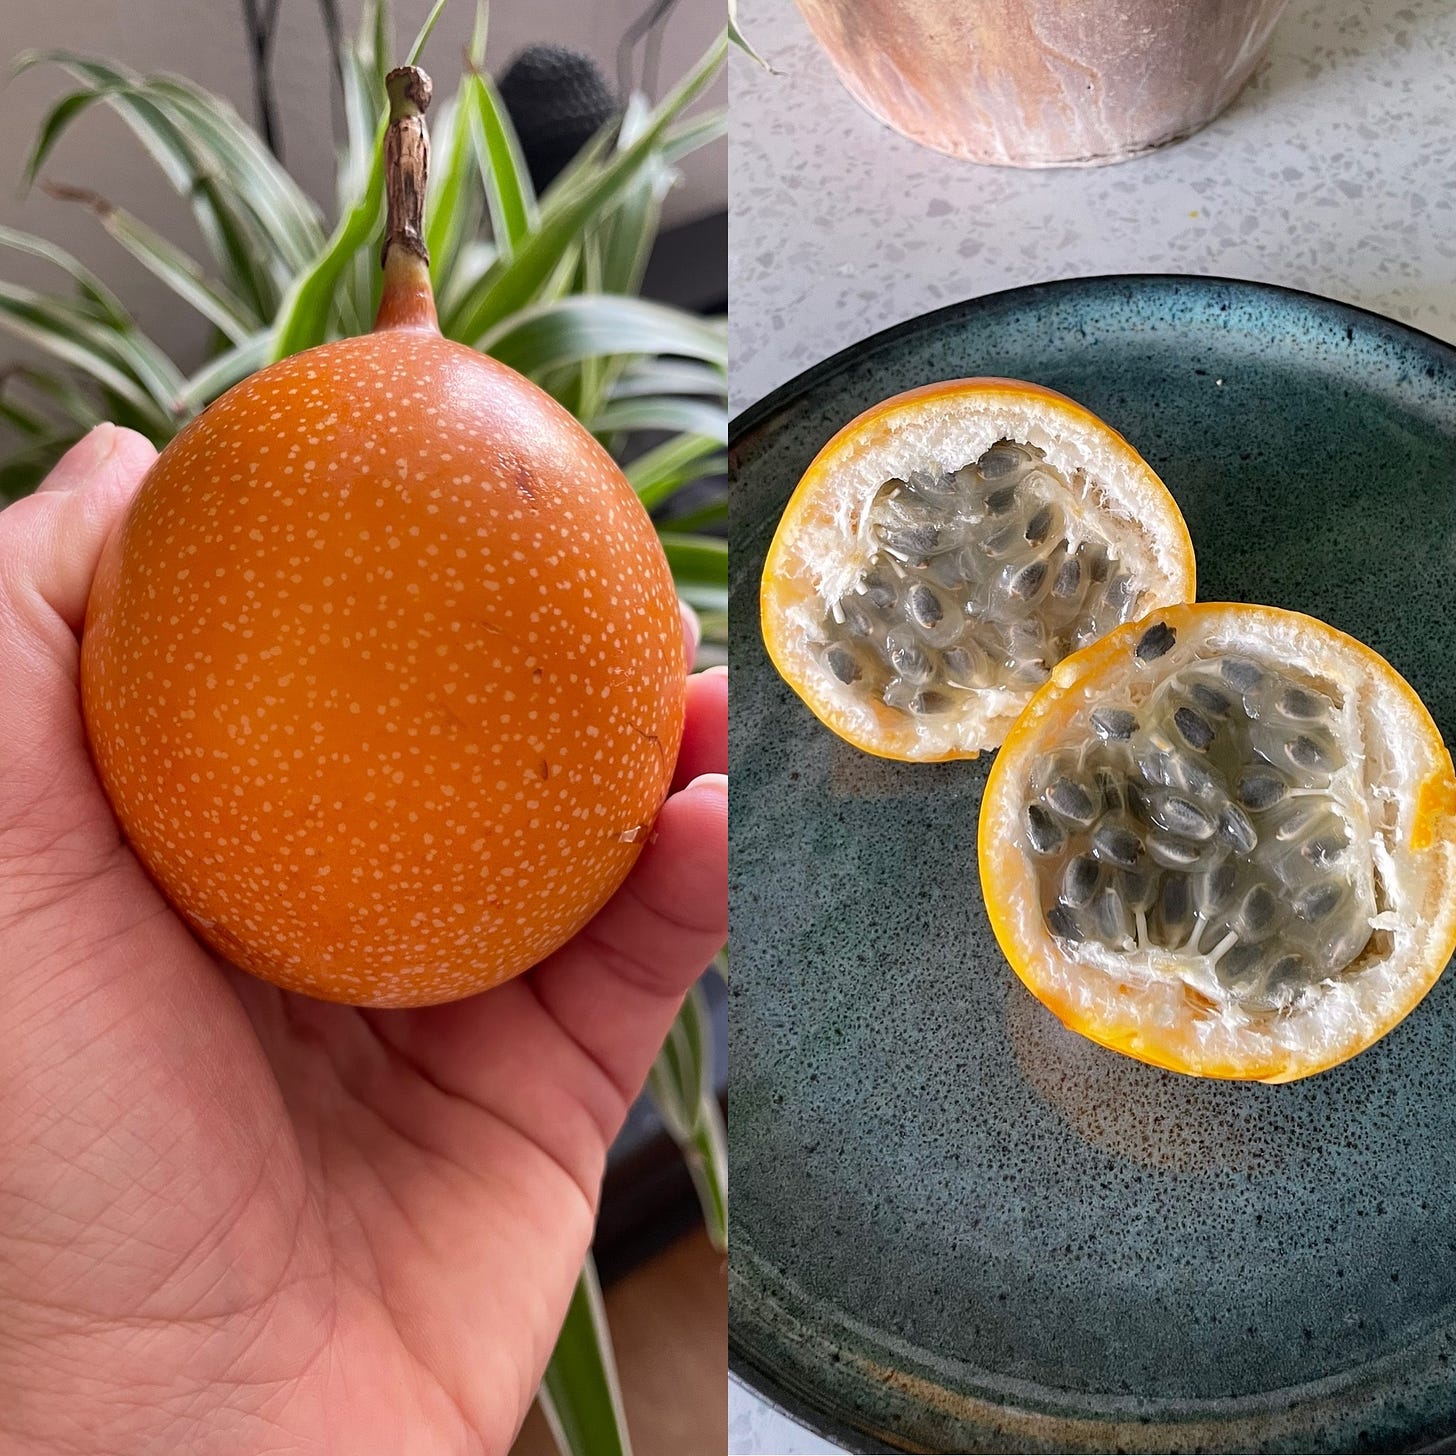 Two images - the left one is of a whole sweet granadilla fruit and the one on the right is the same fruit cut in half to show the grey seeds inside it